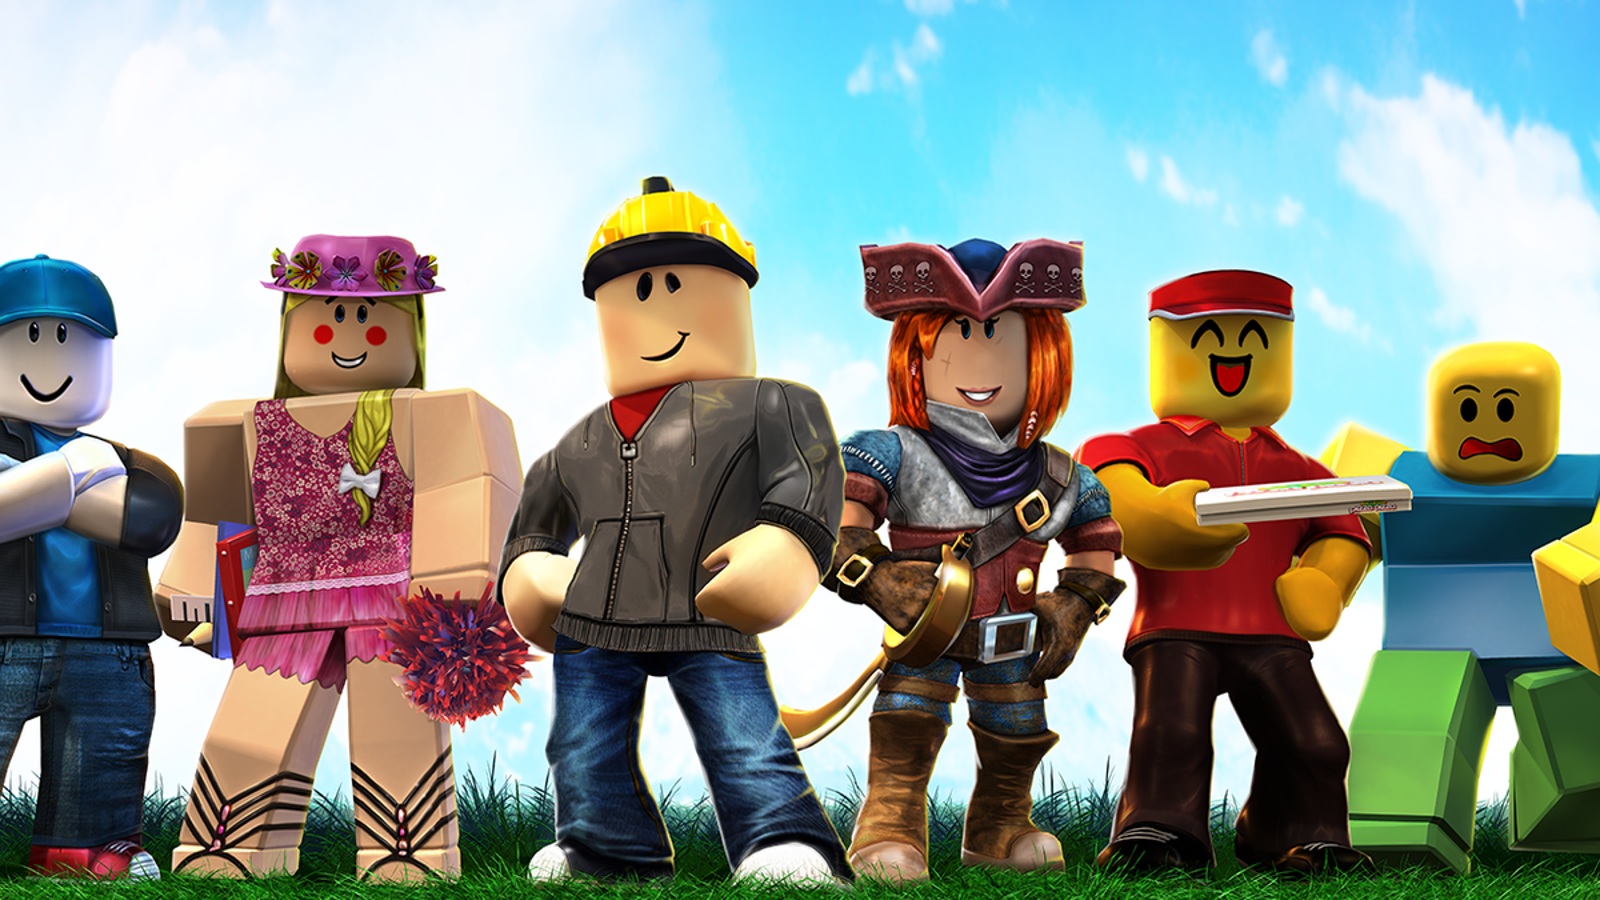 Roblox player spending passes $1.5bn on mobile